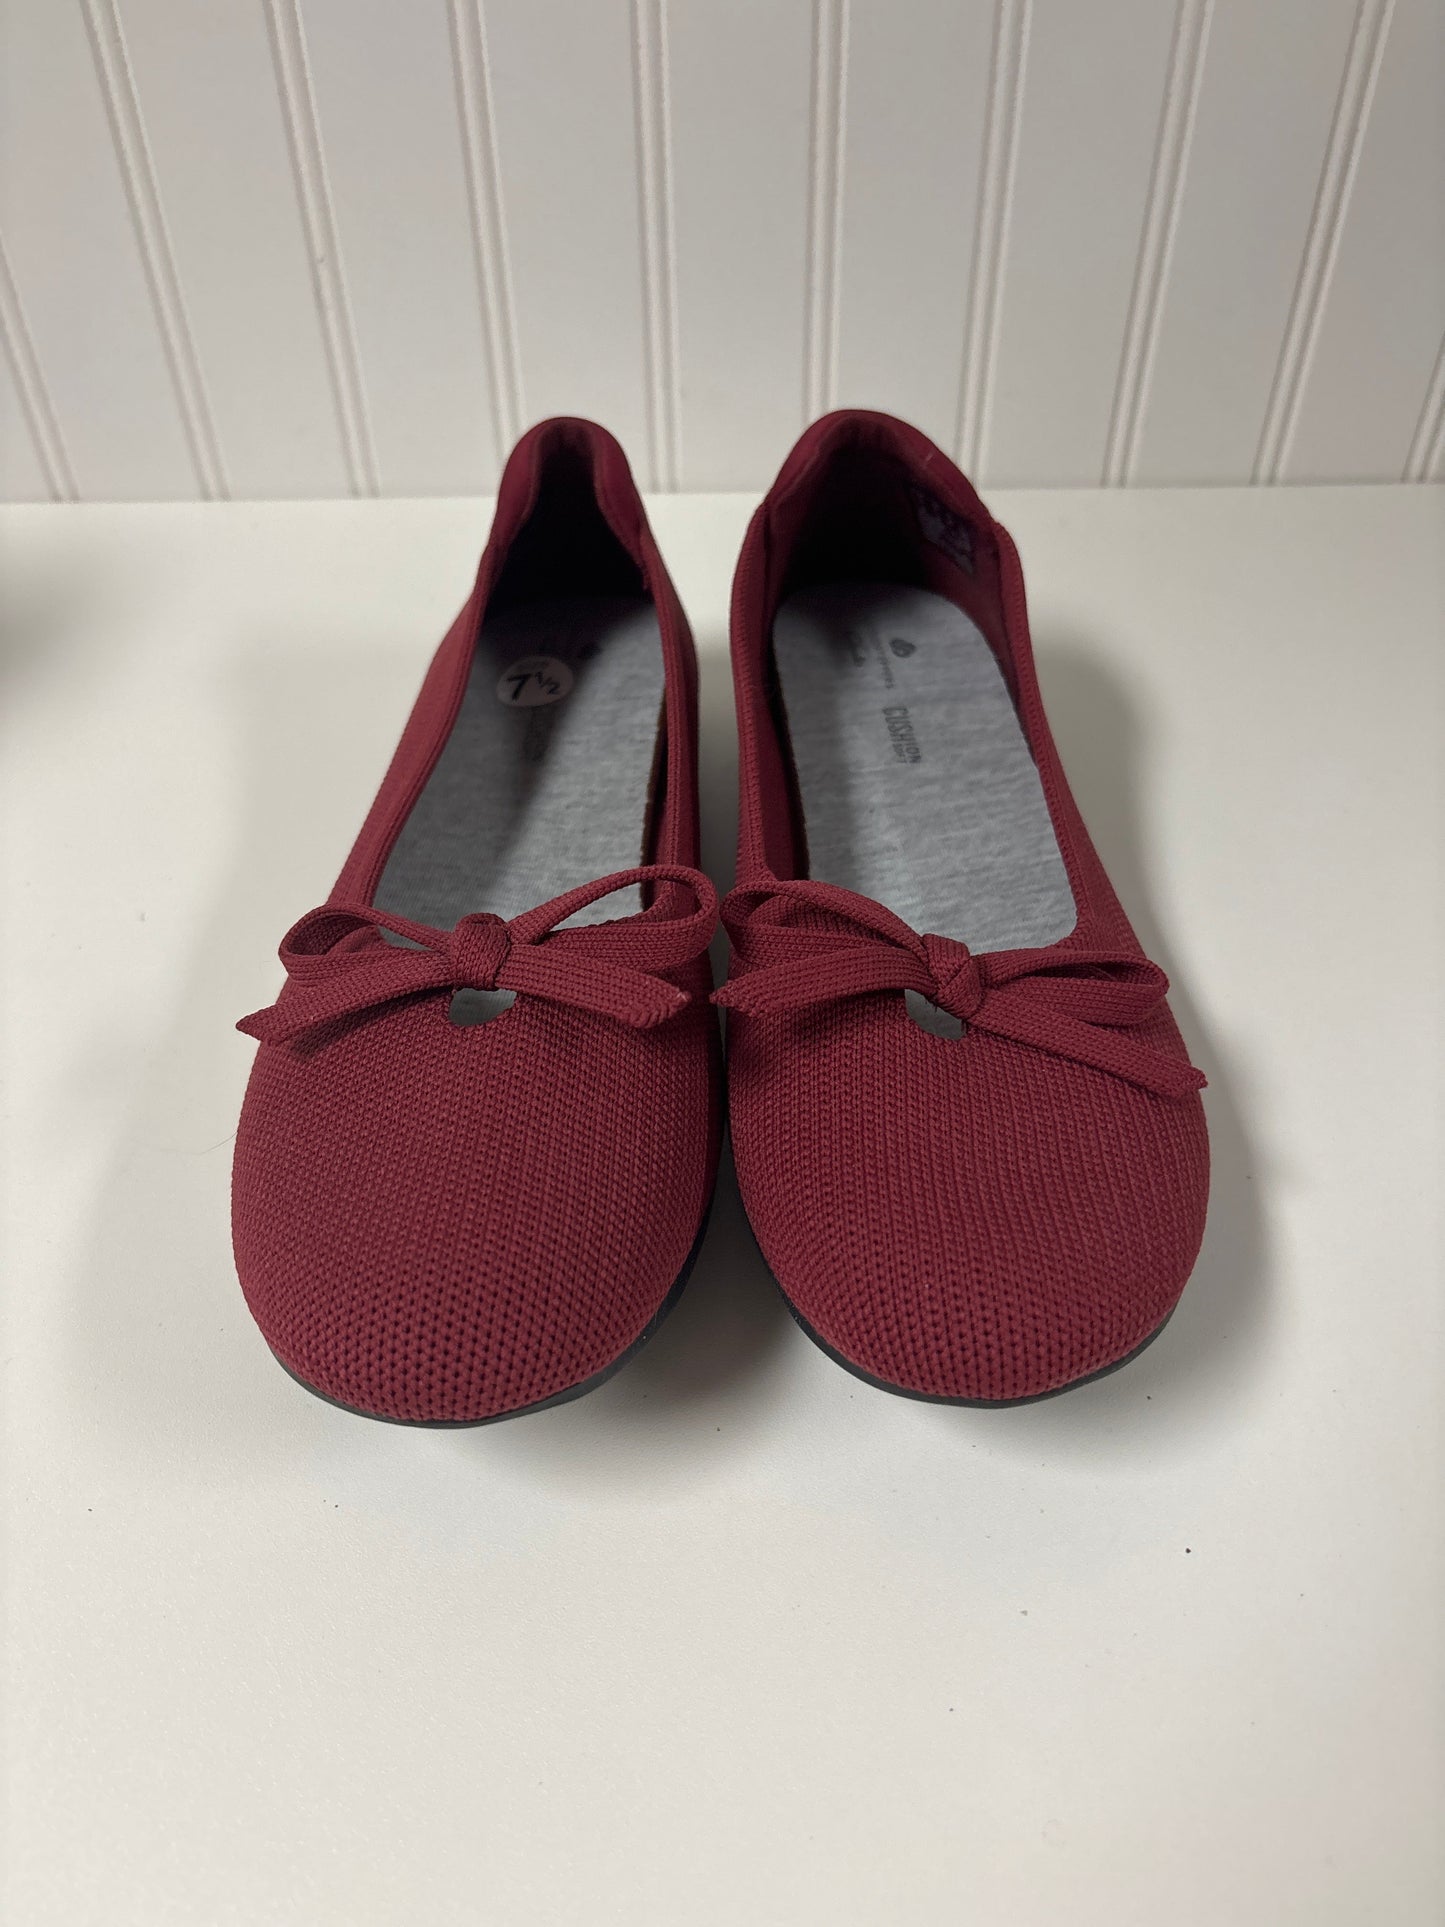 Shoes Flats By Clarks  Size: 7.5